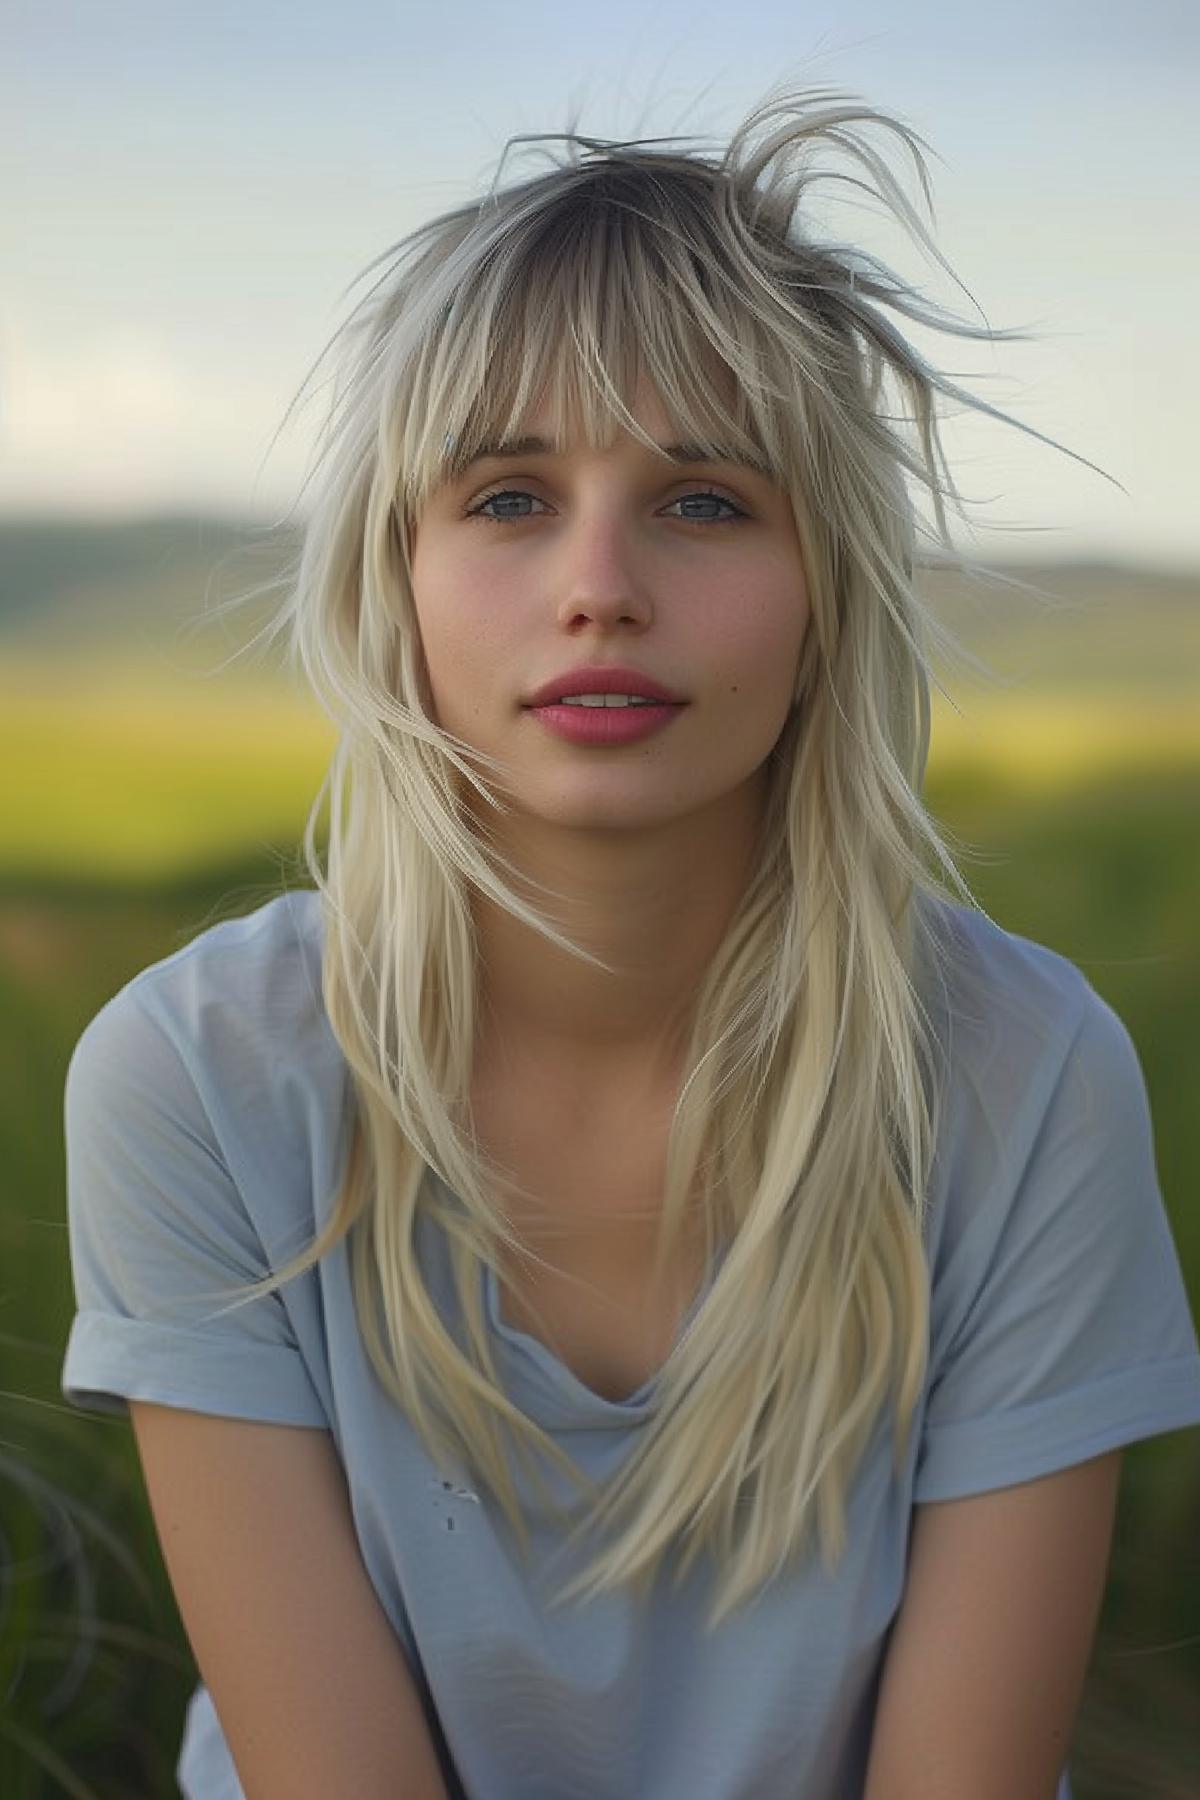 Close-up of a young woman with a modern Wolf Cut with fringe, styled in straight blonde hair against a natural background.